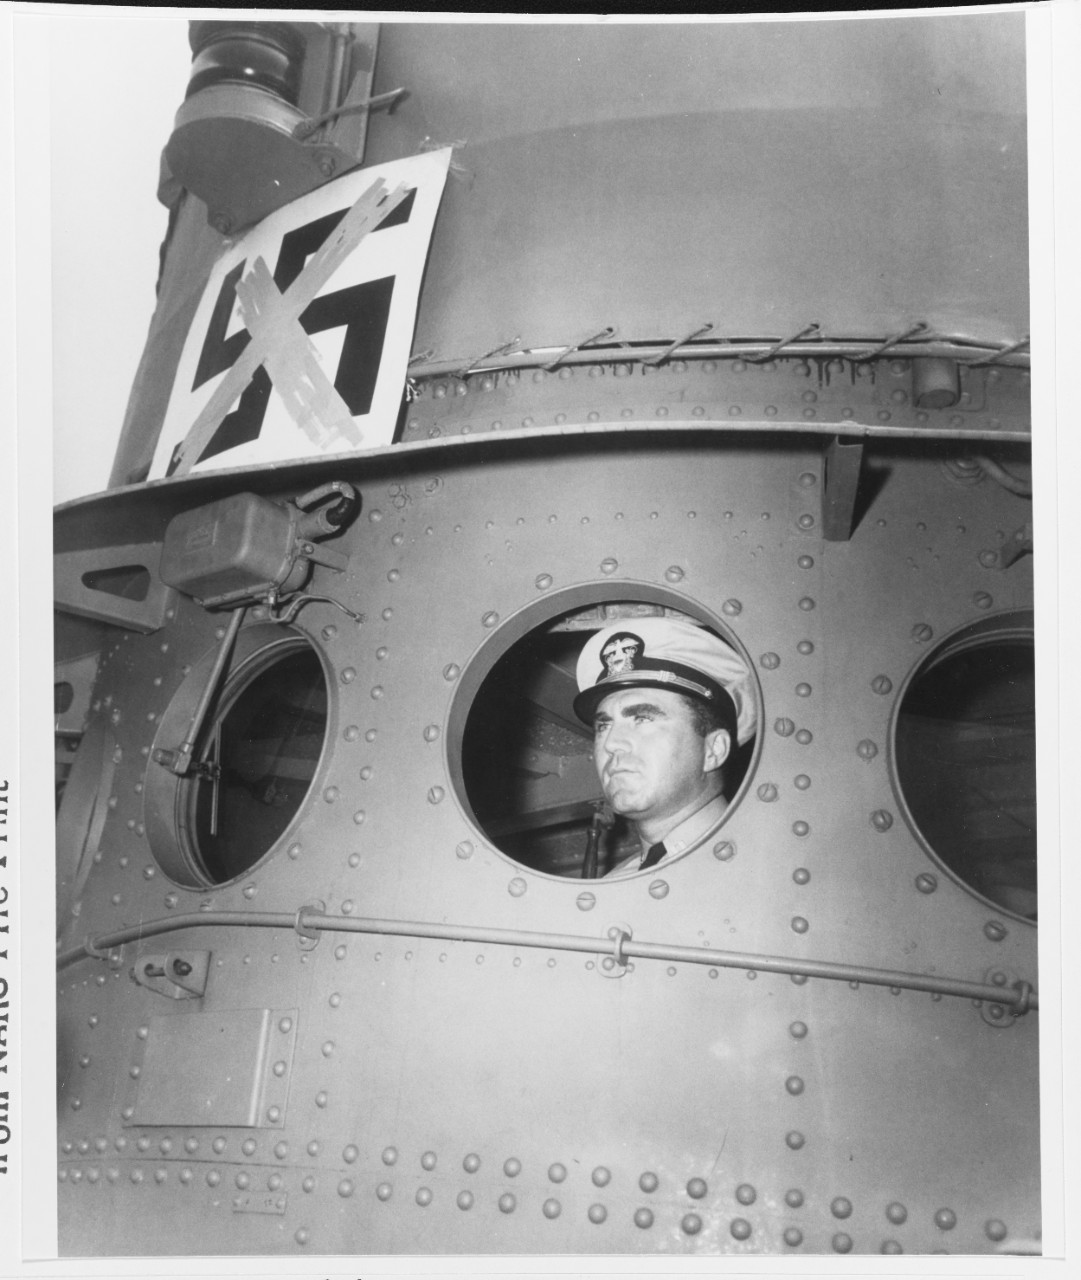 Ship's commander officer, LT Walter T. Flynn, USNR, looks out from a pilot house porthole, 9 August 1943. His ship sank German submarine U-521 off the US East Coast on 2 June 1932. Symbol on bridge face commemorates the event. Note riveted plating, and porthole wiper. 